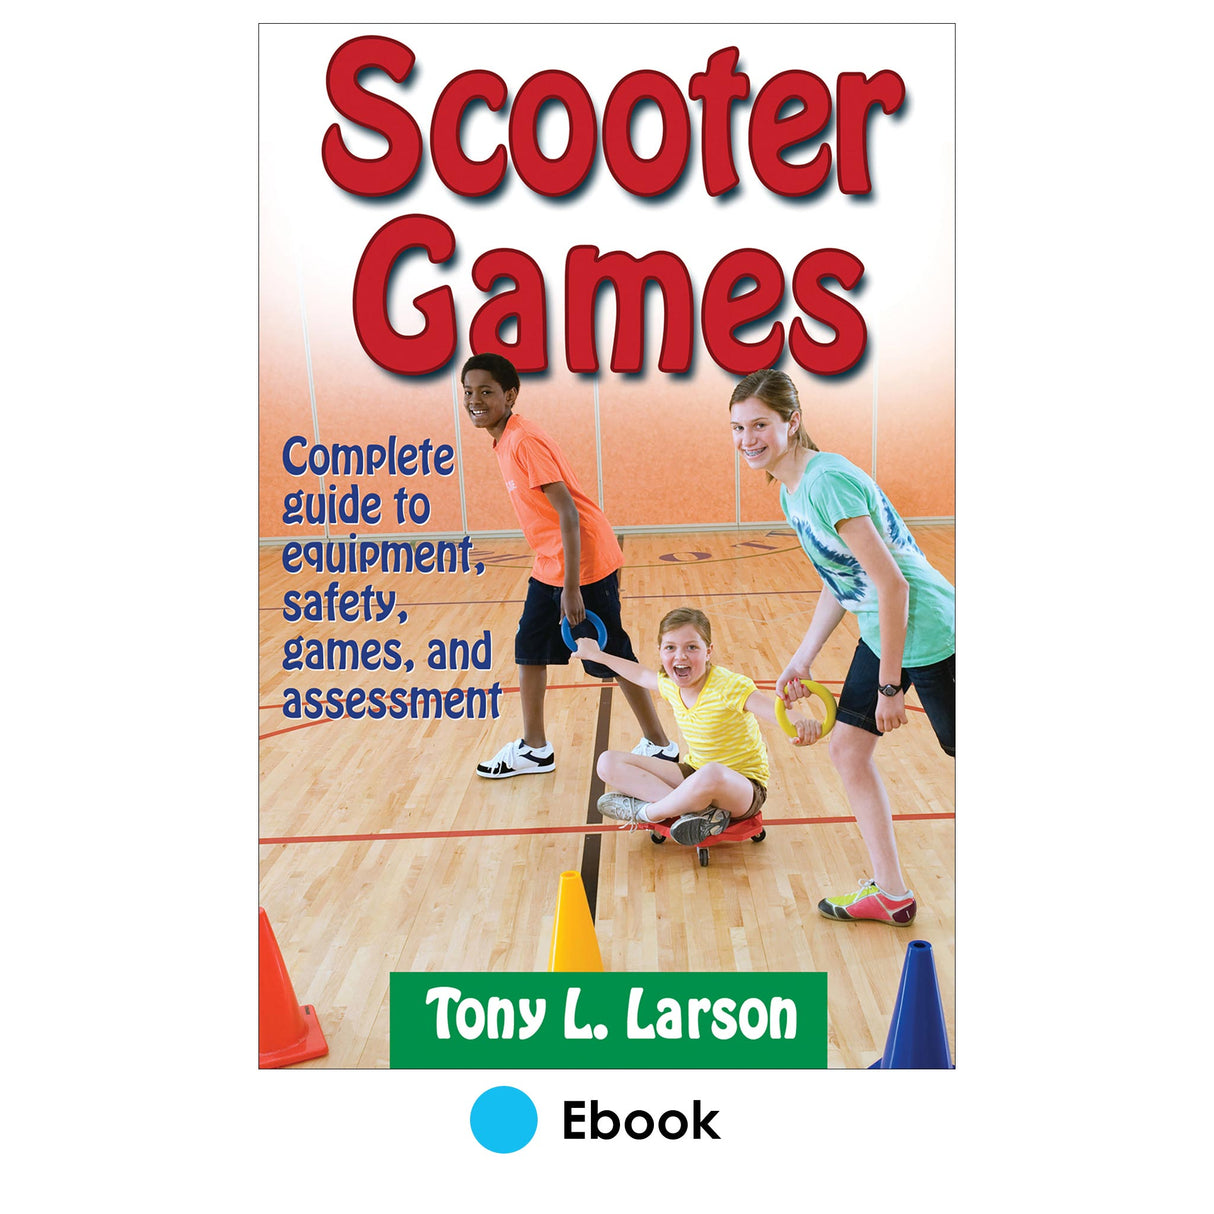 Scooter Games PDF